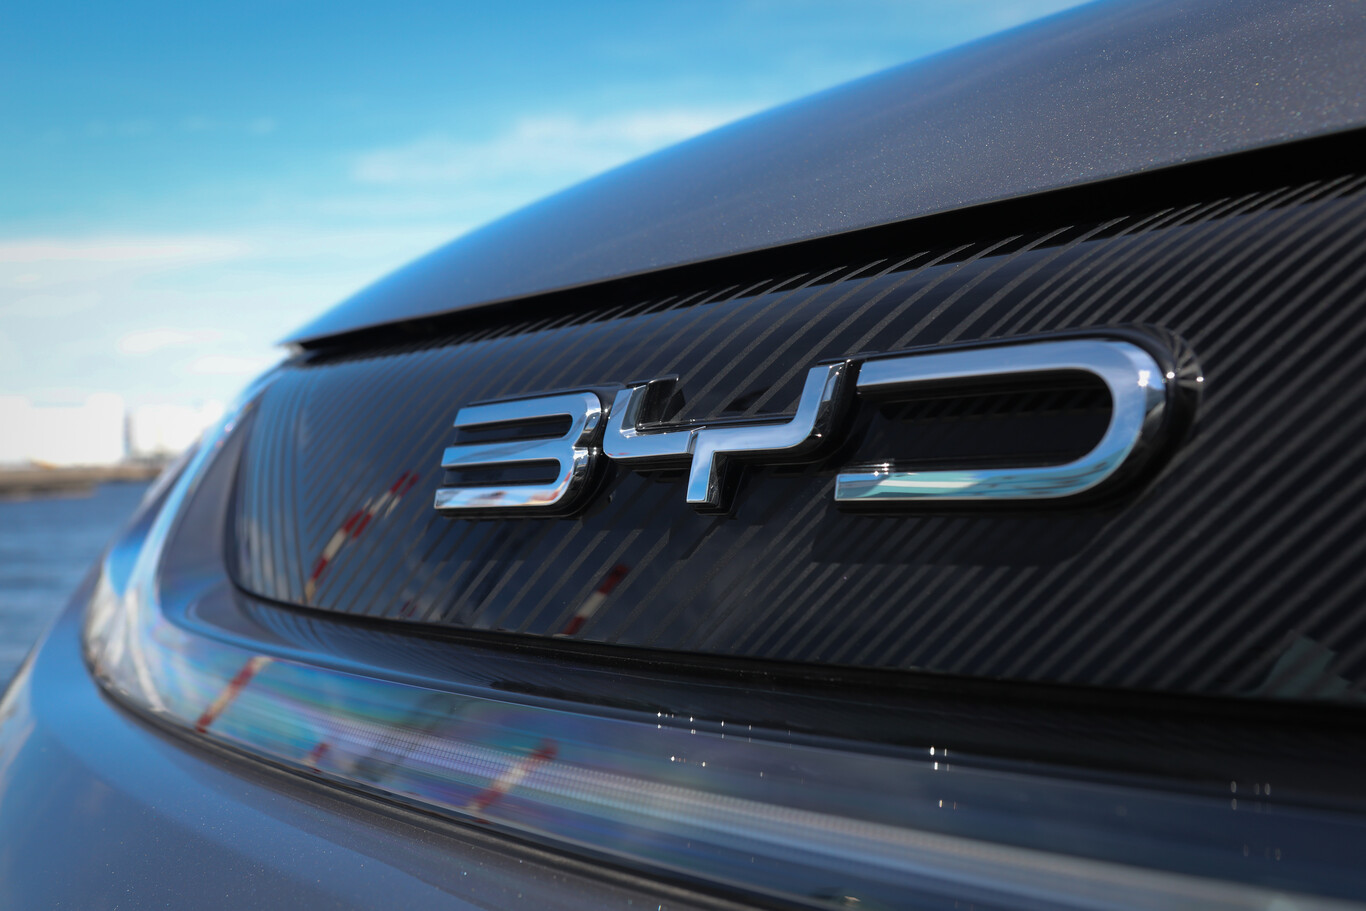 BYD to create 10,000 jobs with its new plant in Mexico